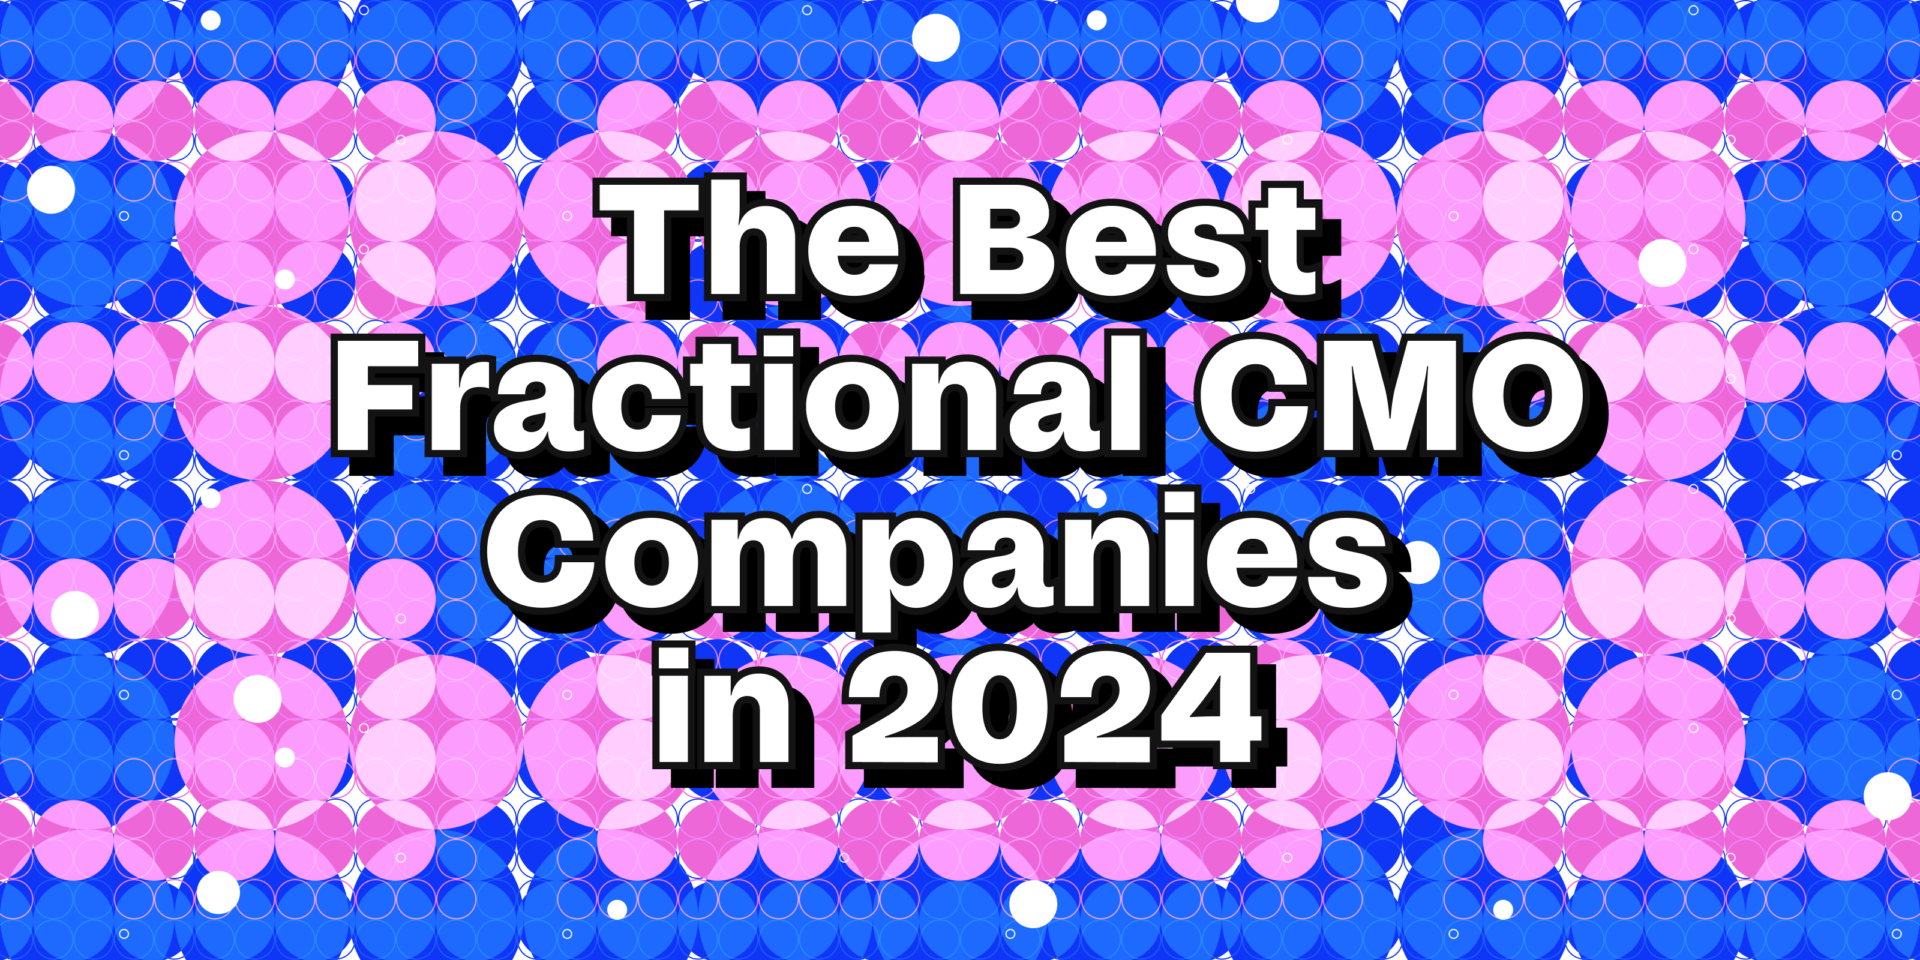 The best fractional CMO companies